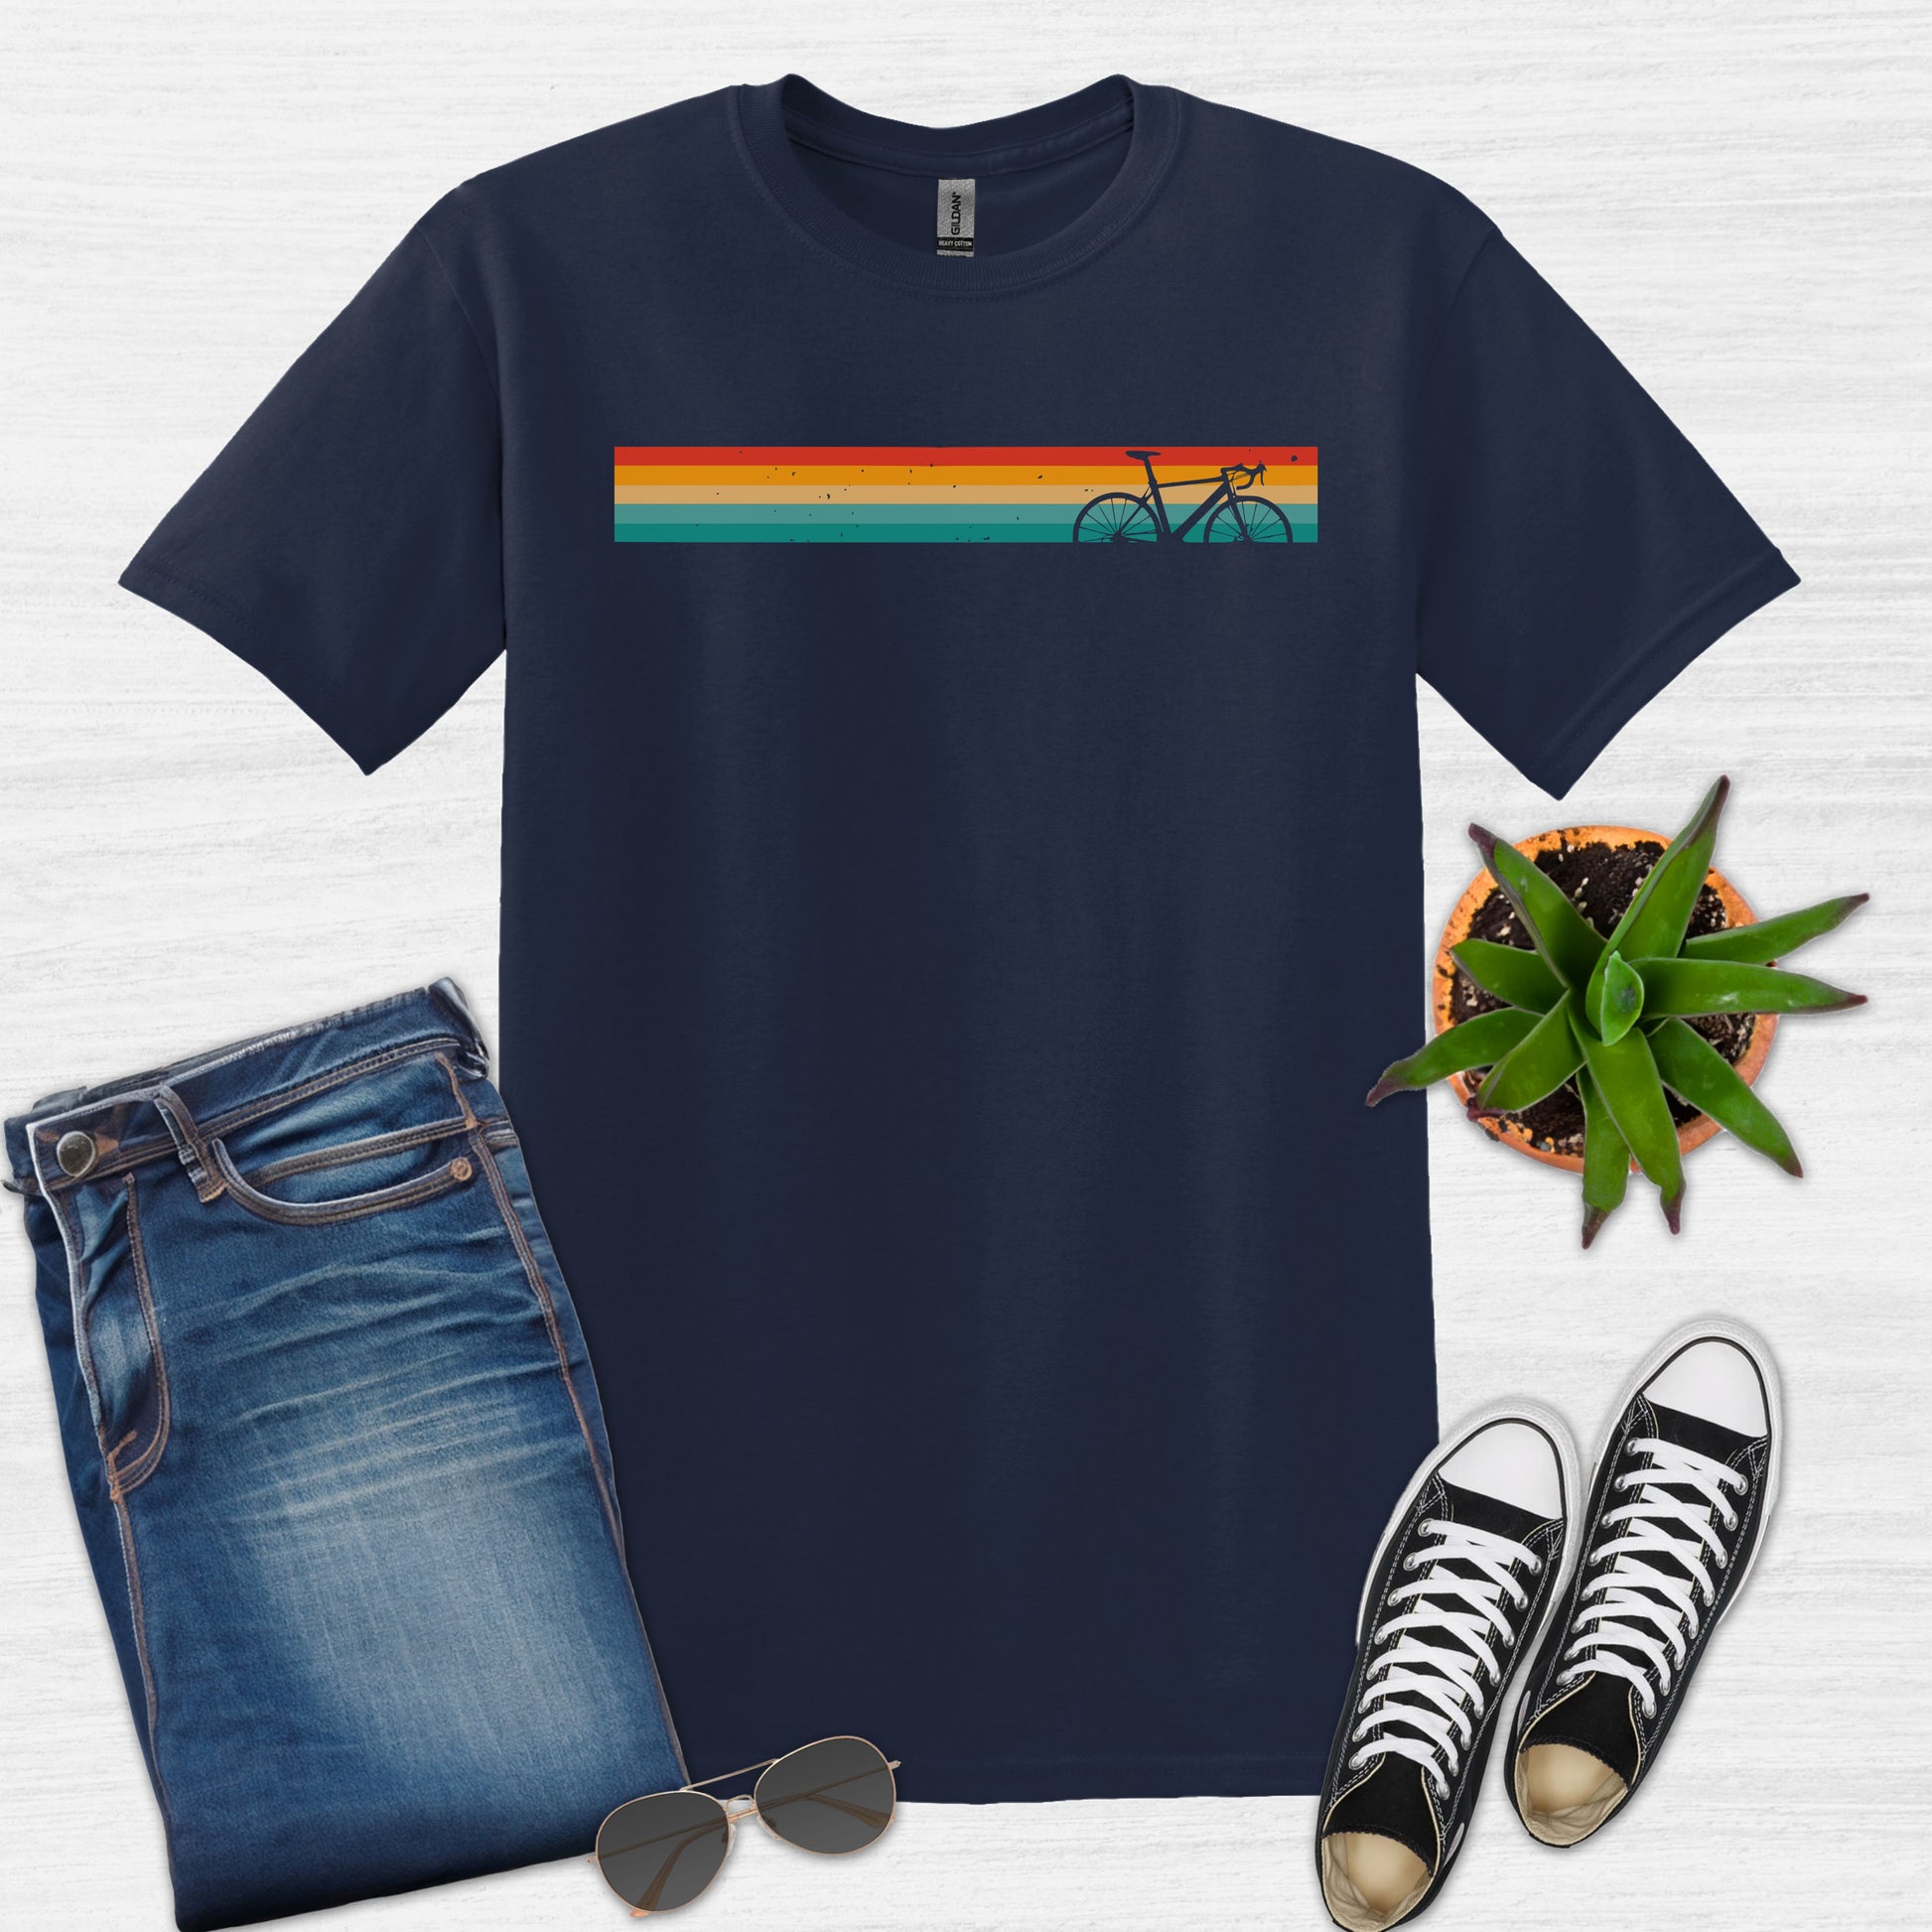 Bike Bliss Vintage Rainbow Colors Bicycle Graphic T-Shirt for men Navy